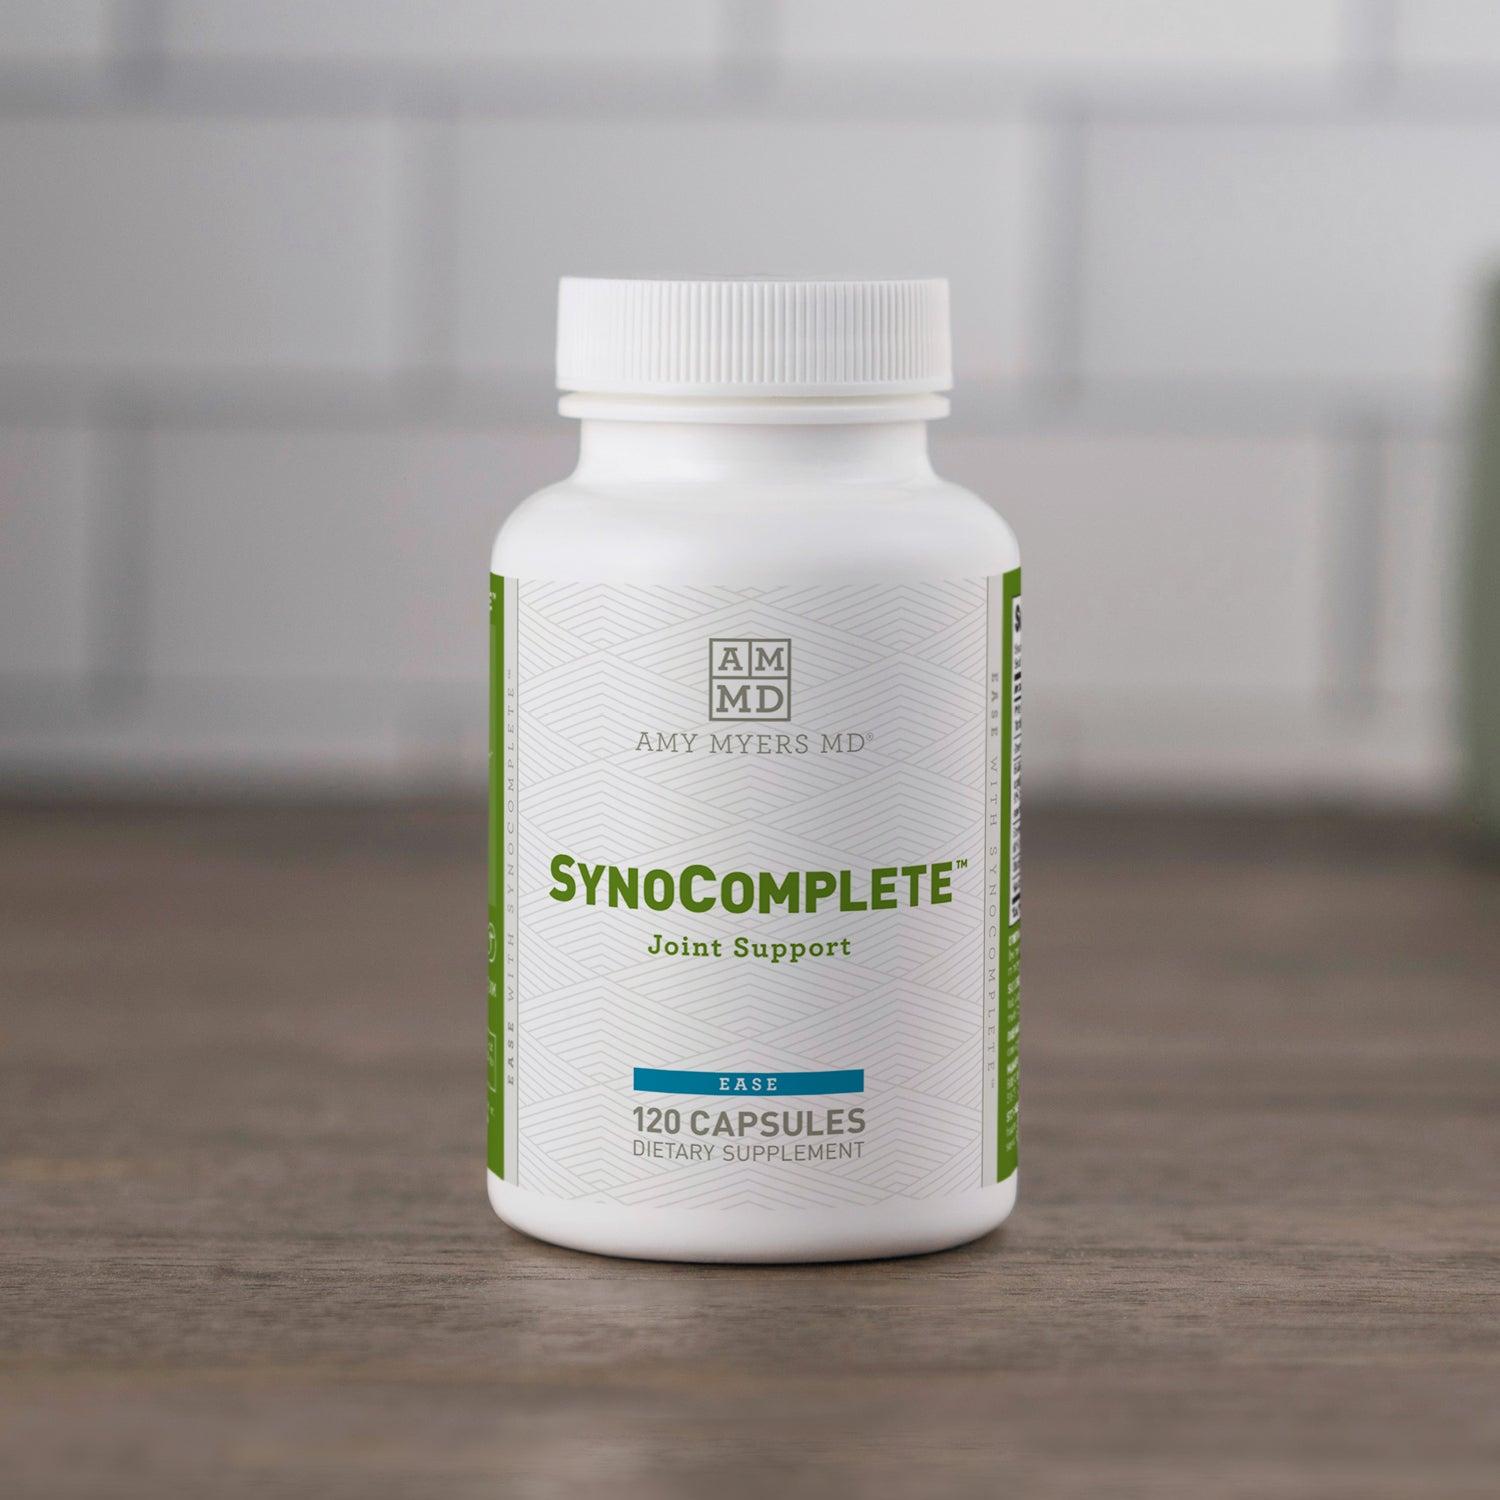 SynoComplete™ Joint Support for Joint Health - Featured Image - Amy Myers MD®